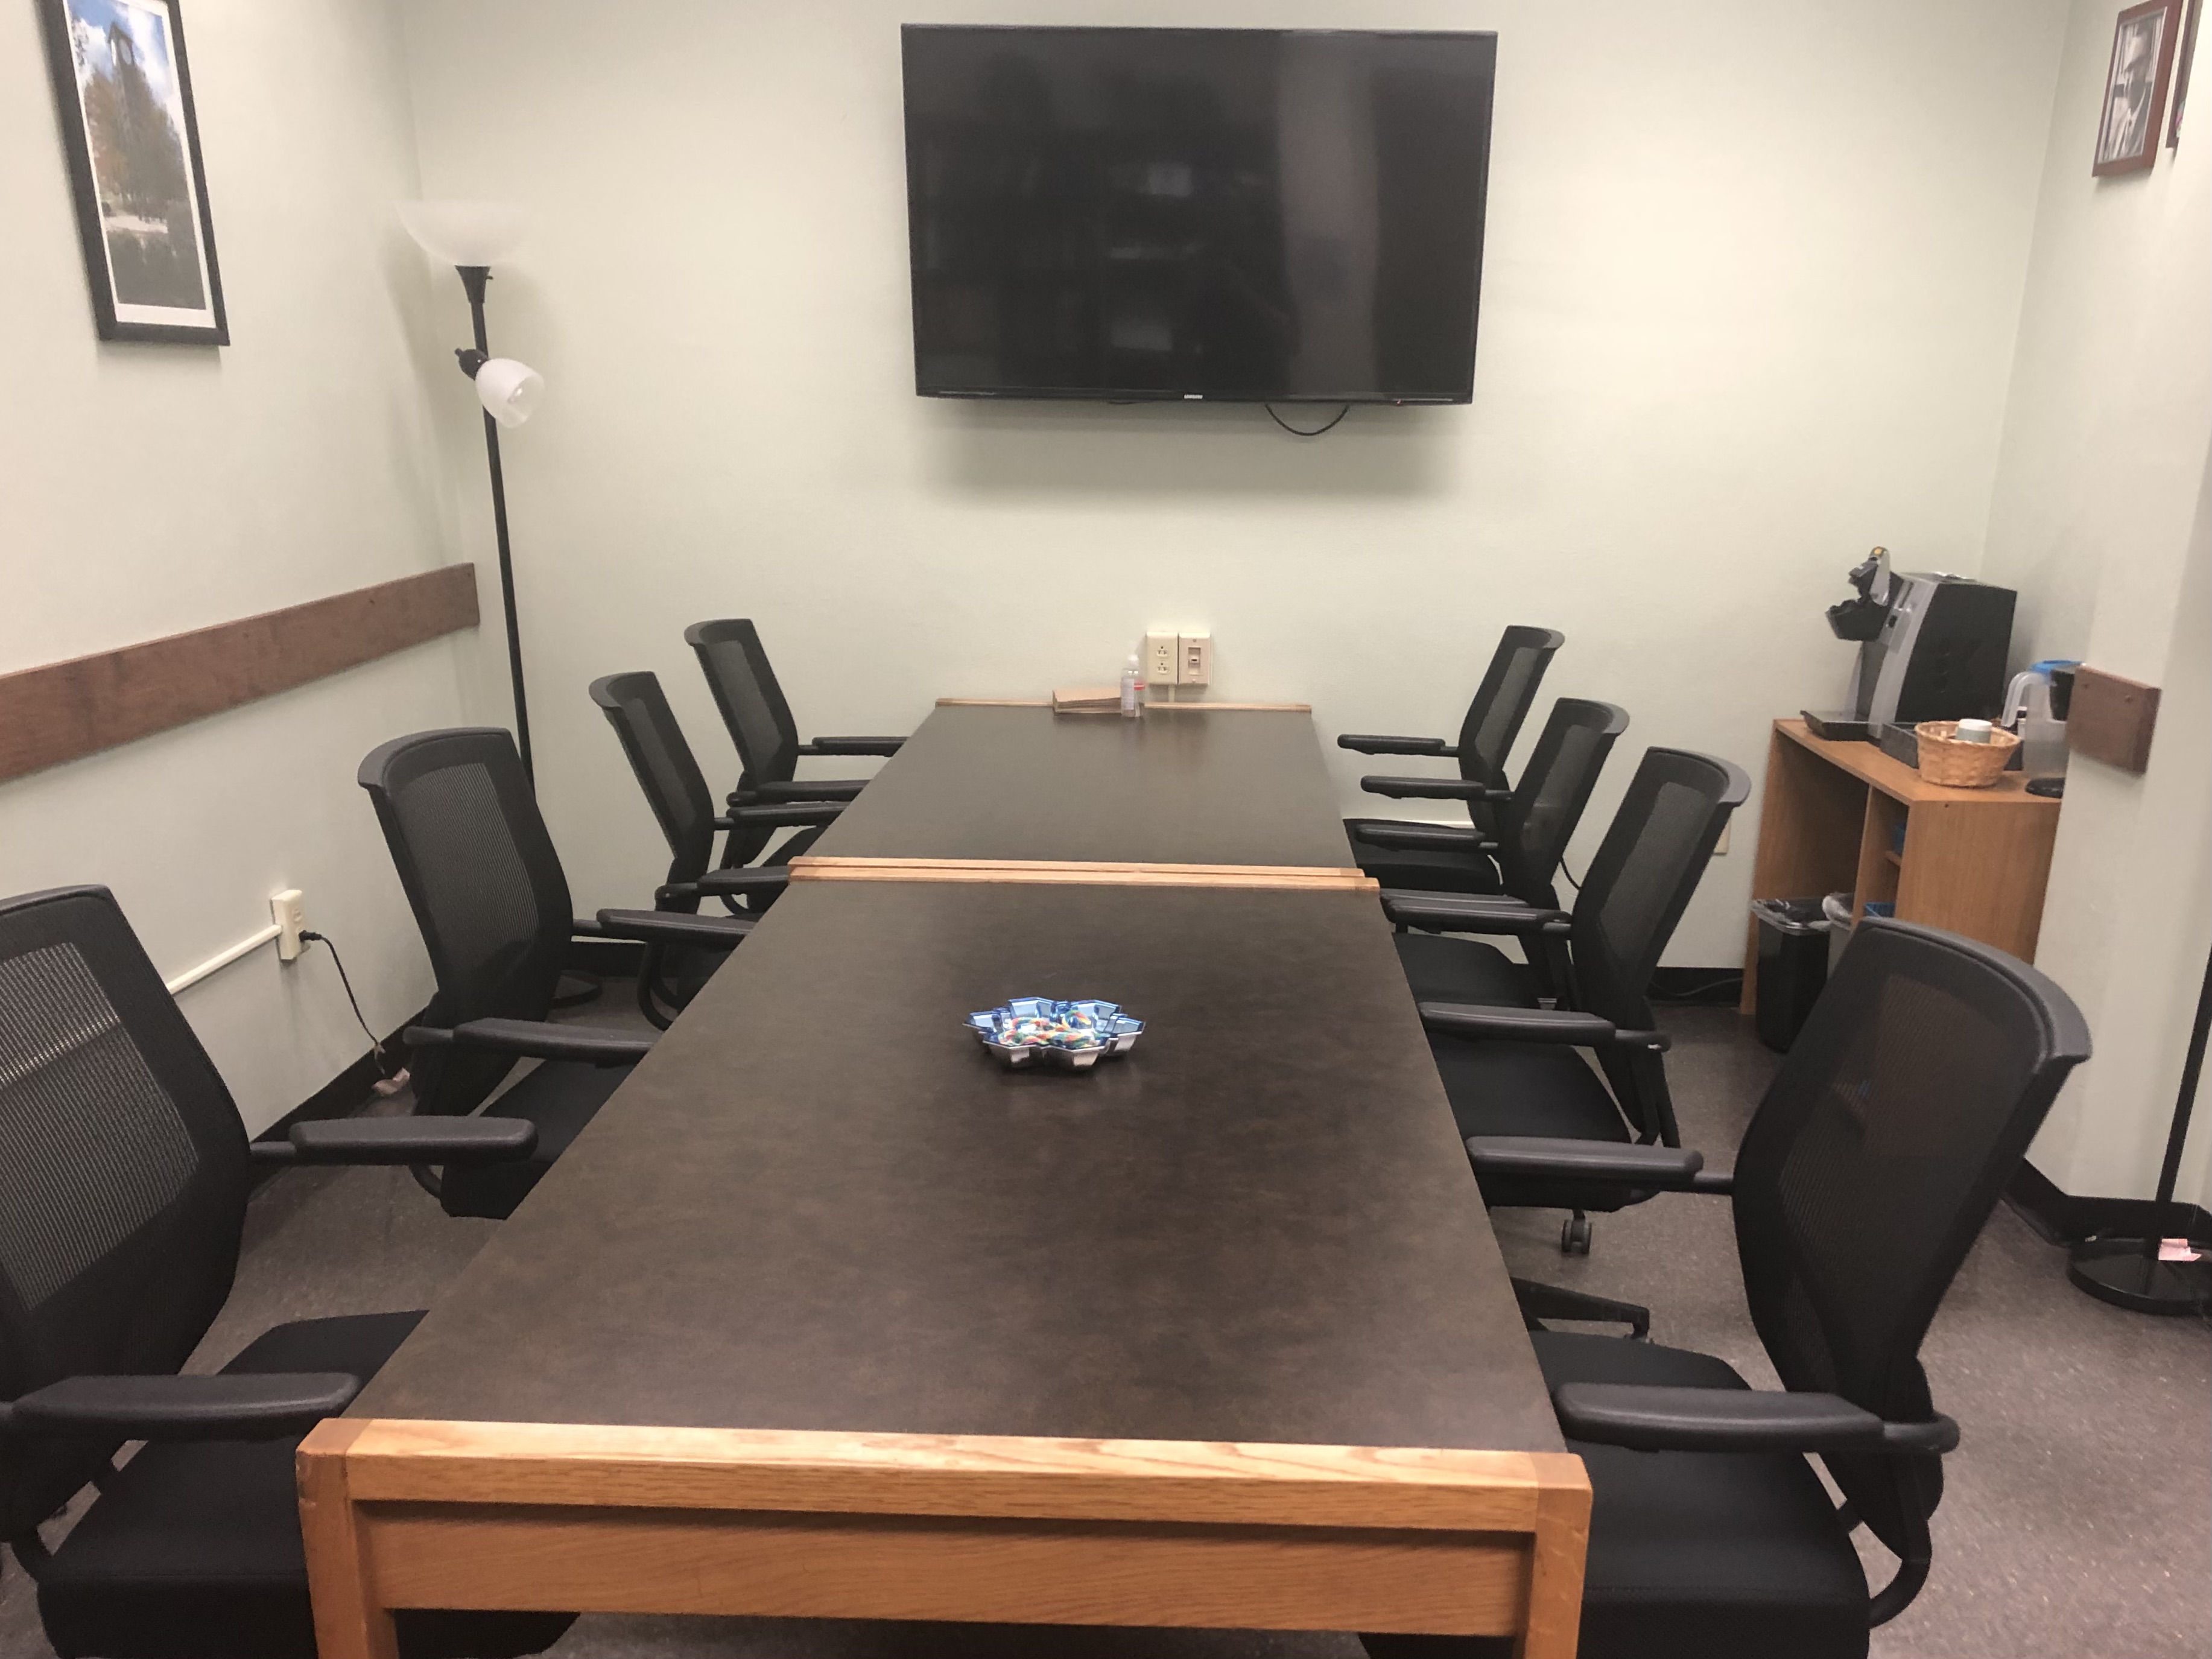 Conference Room with a table and chairs and TV.